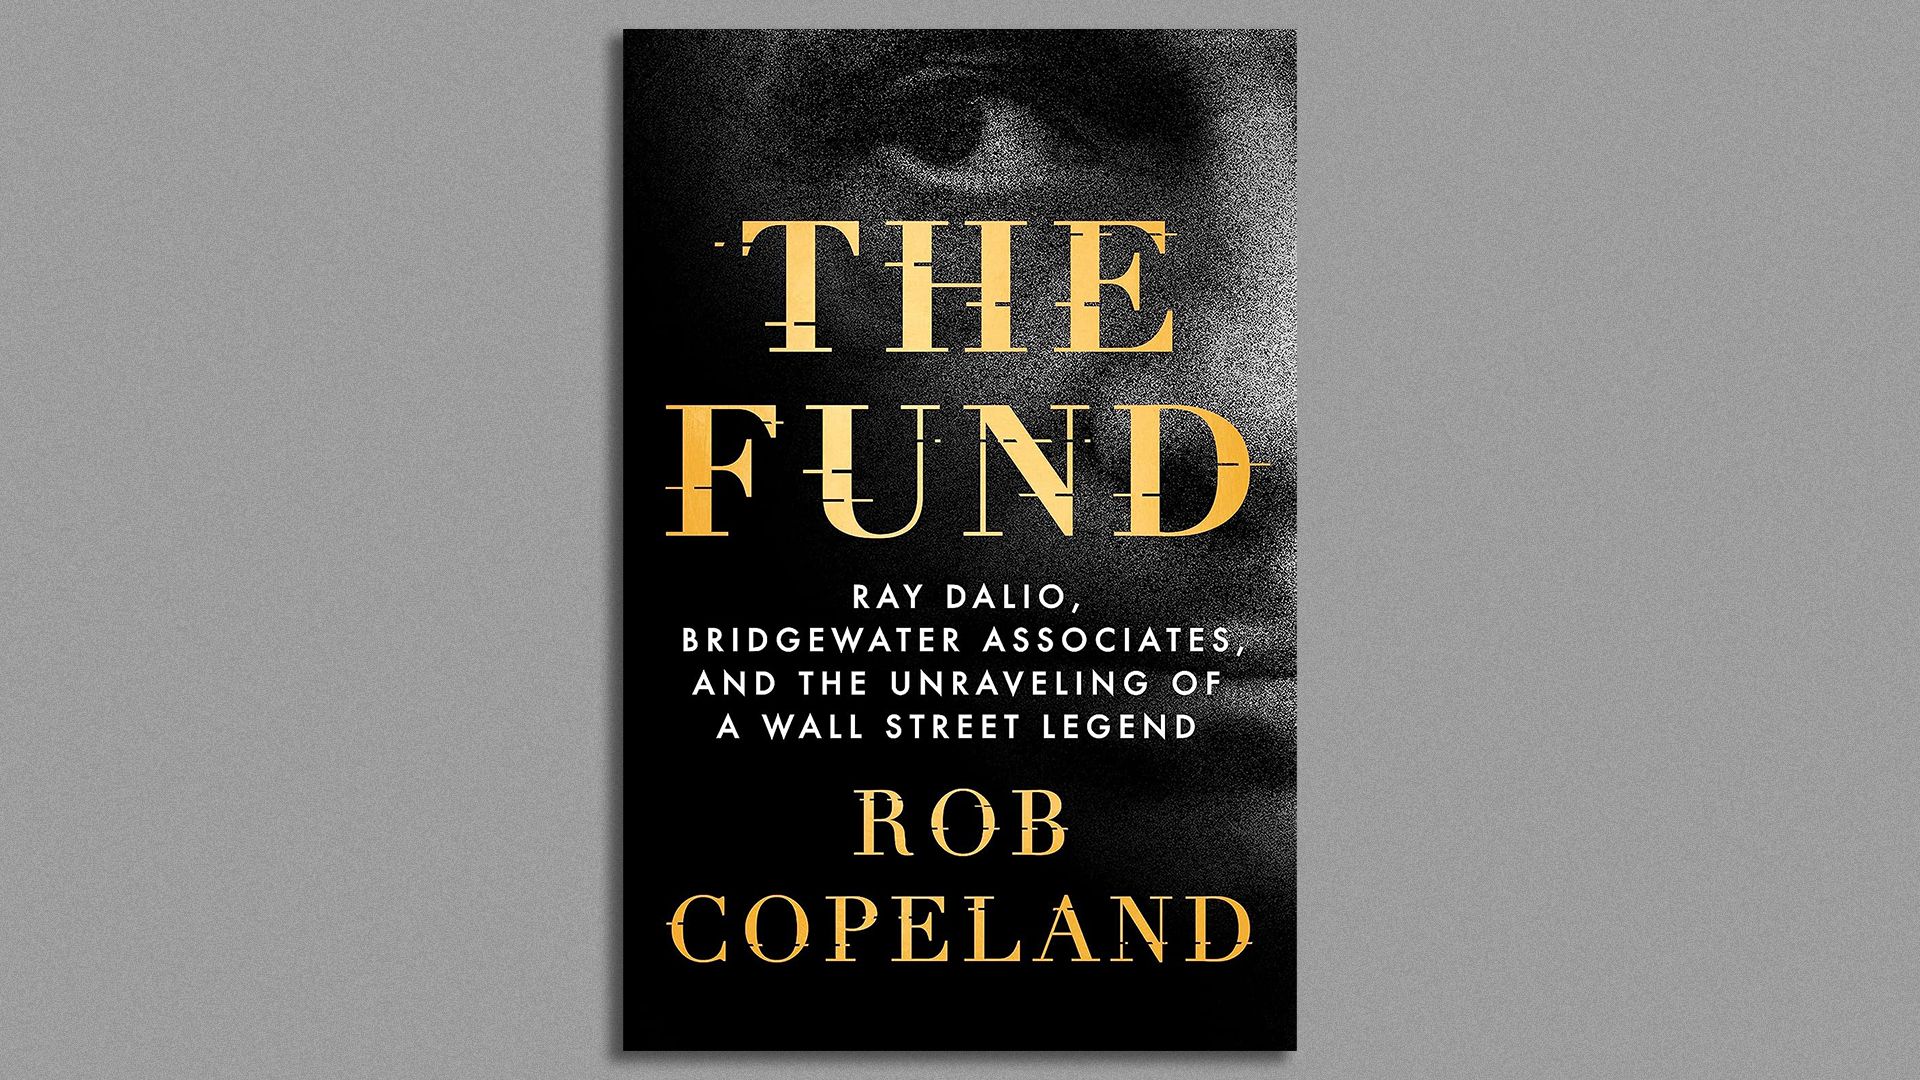 The cover of "The Fund," by Rob Copeland